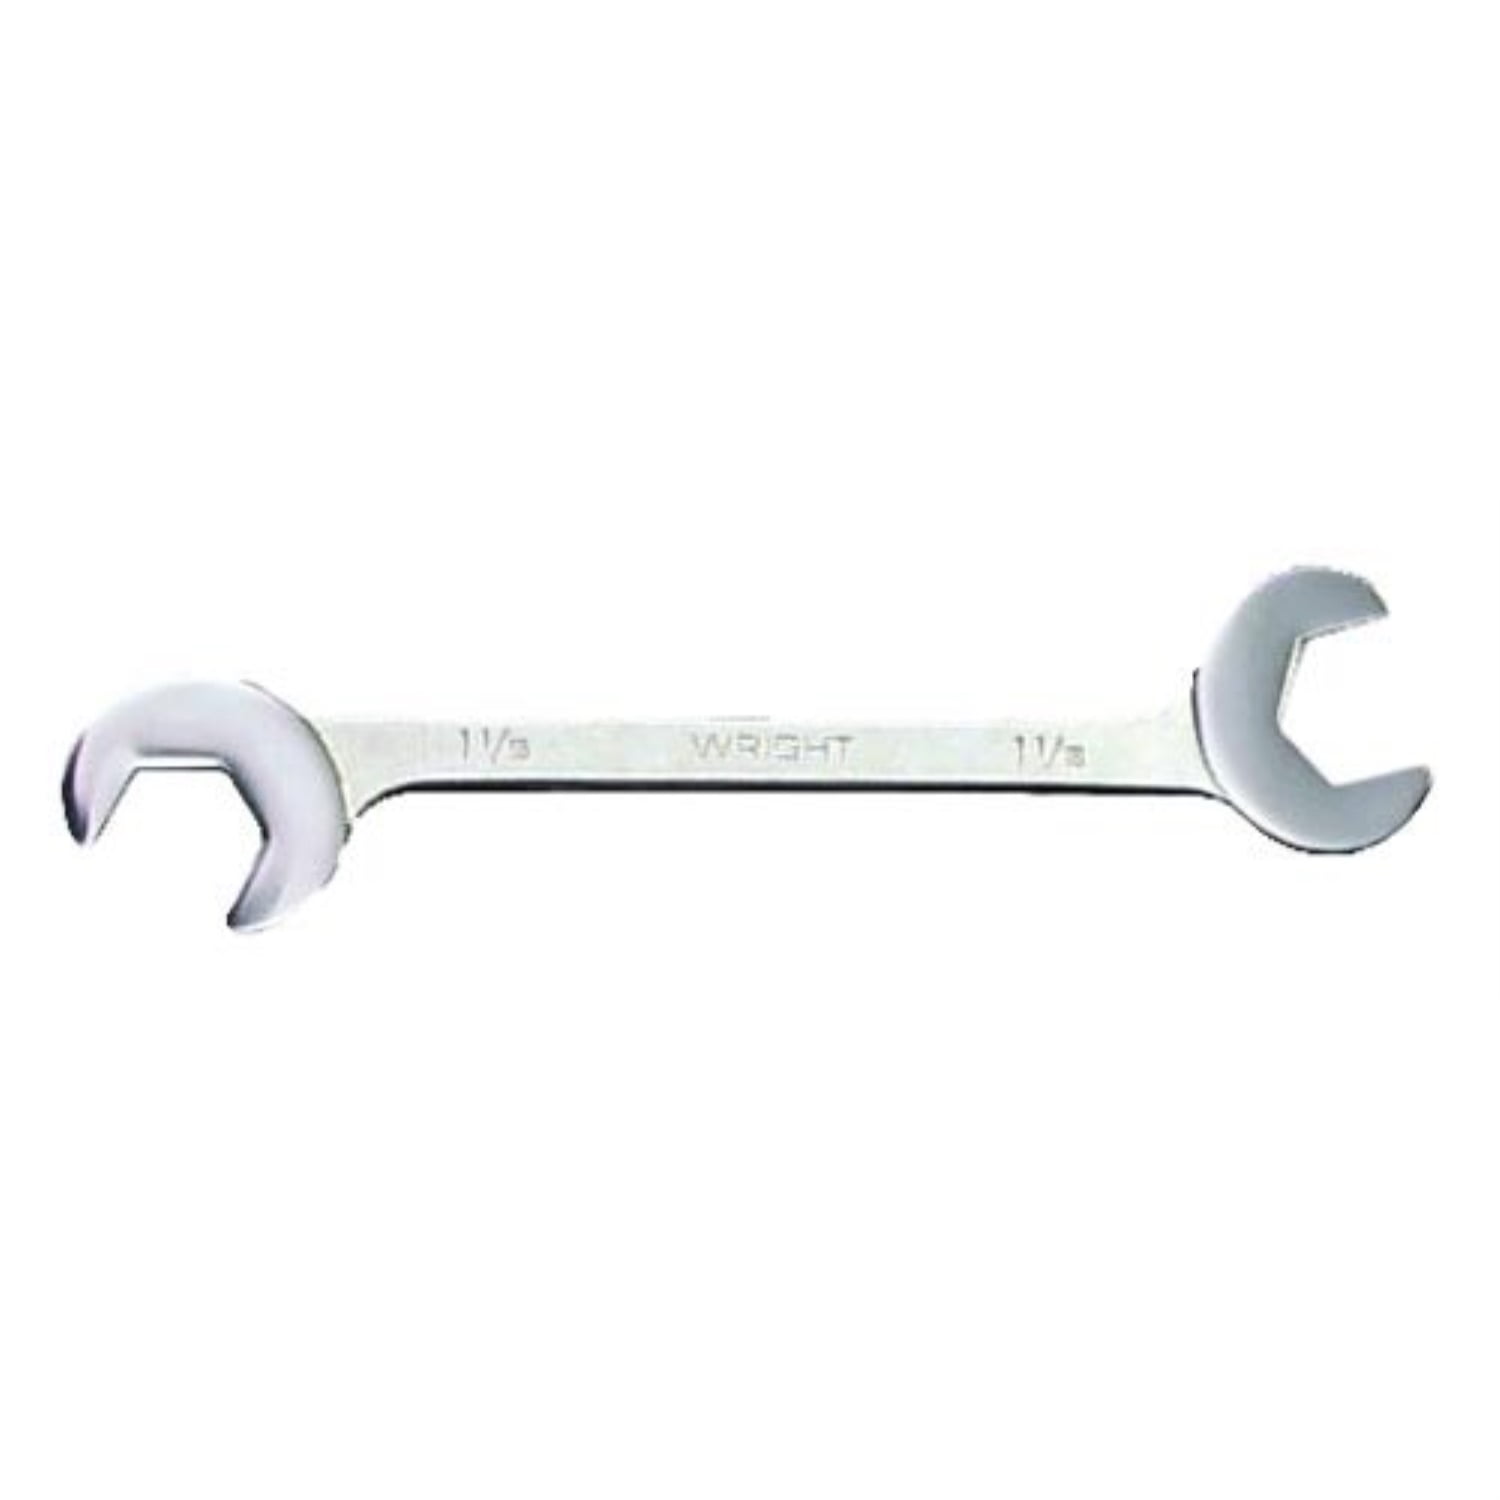 1-1//4 x 1-1//4 Wright Tool 1386 Double Angle Open End Wrench